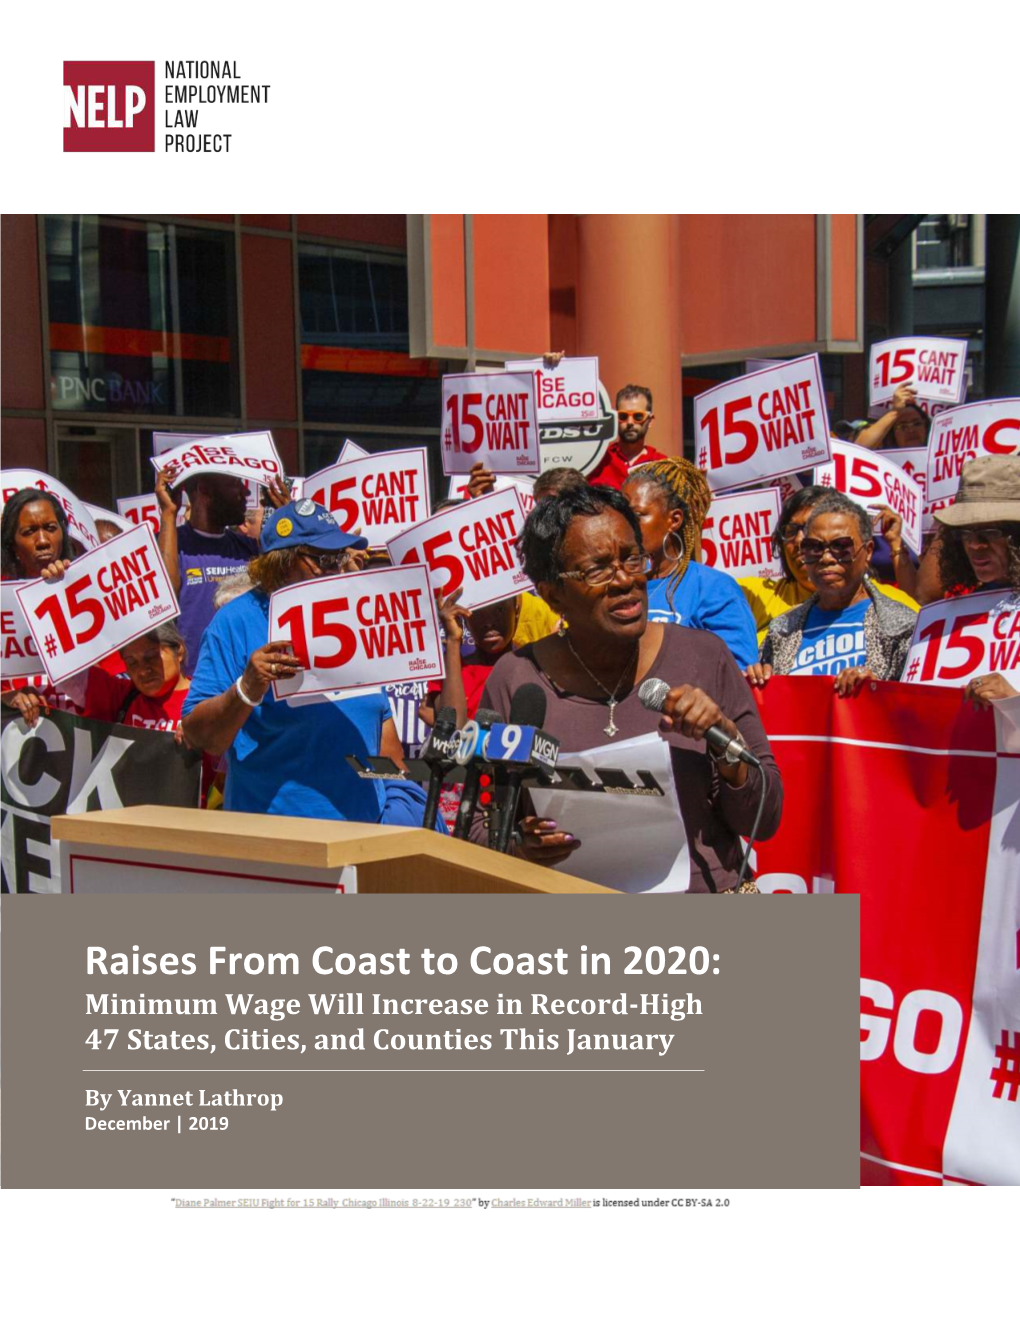 Raises from Coast to Coast in 2020: Minimum Wage Will Increase in Record-High 47 States, Cities, and Counties This January